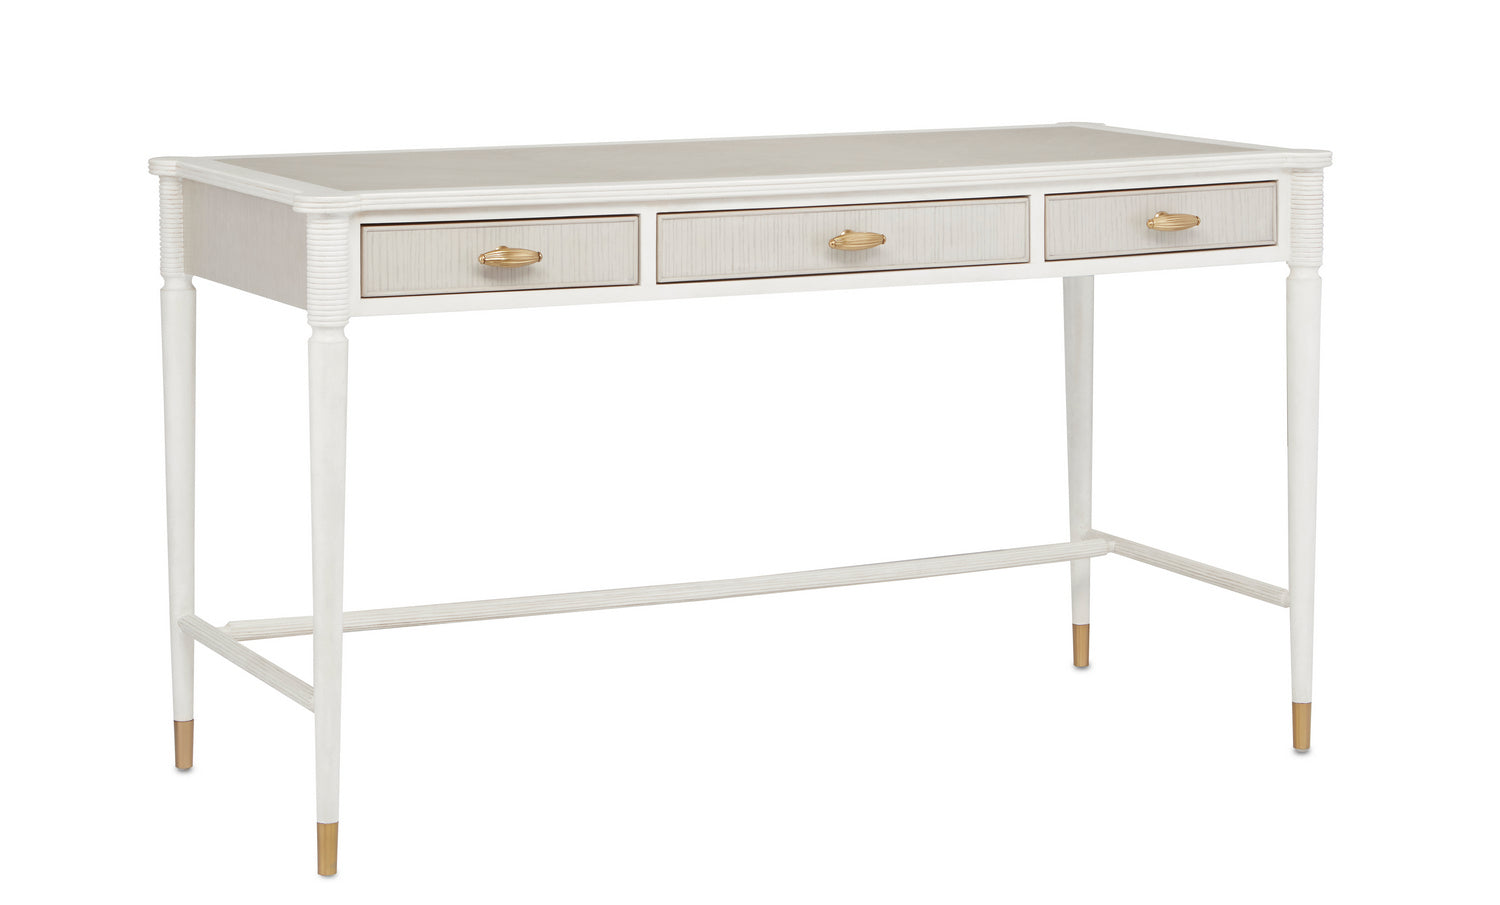 Desk from the Winterthur collection in Off White/Fog/Brass finish